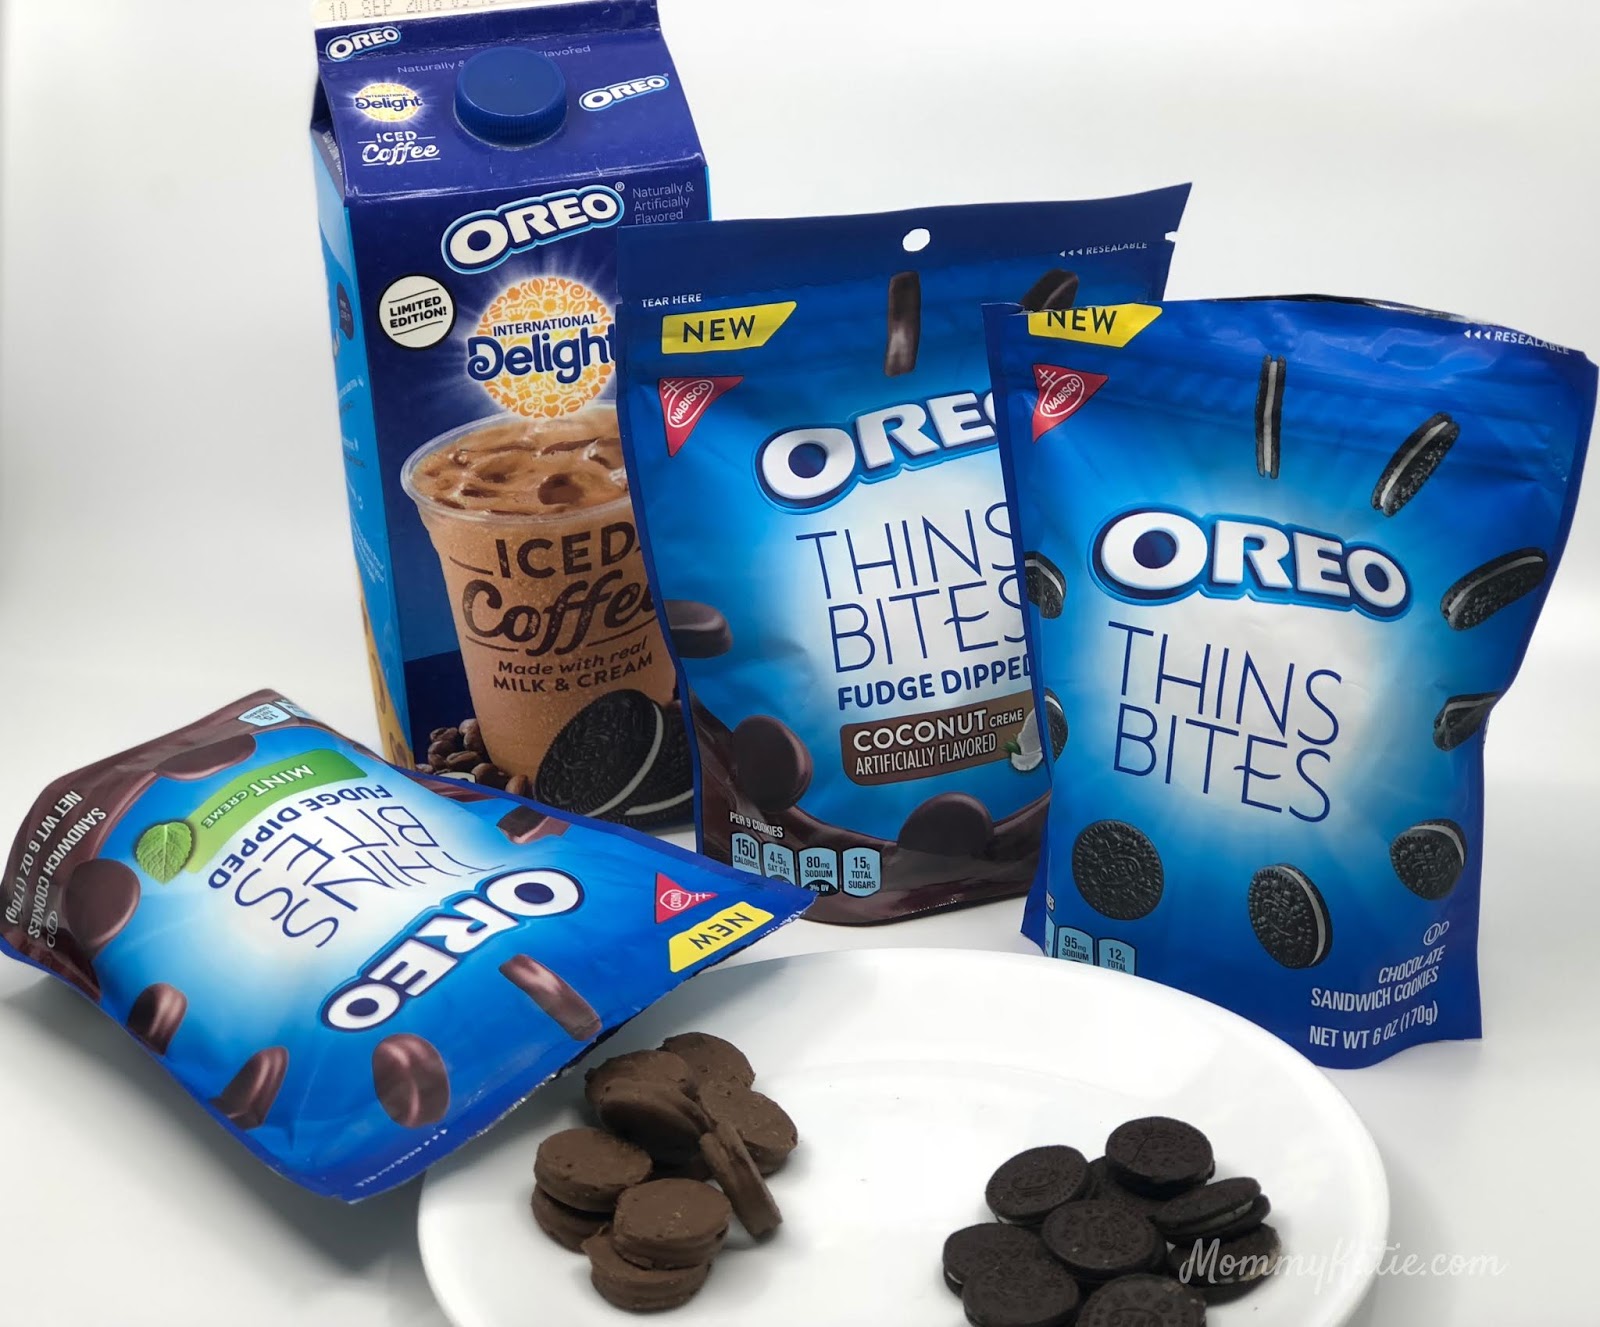 Oreo Thins Bites And Id Oreo Iced Coffee Walmart A Sweet Deal Mommy Katie - sub urban cradles roblox id donut the dog roblox flee the